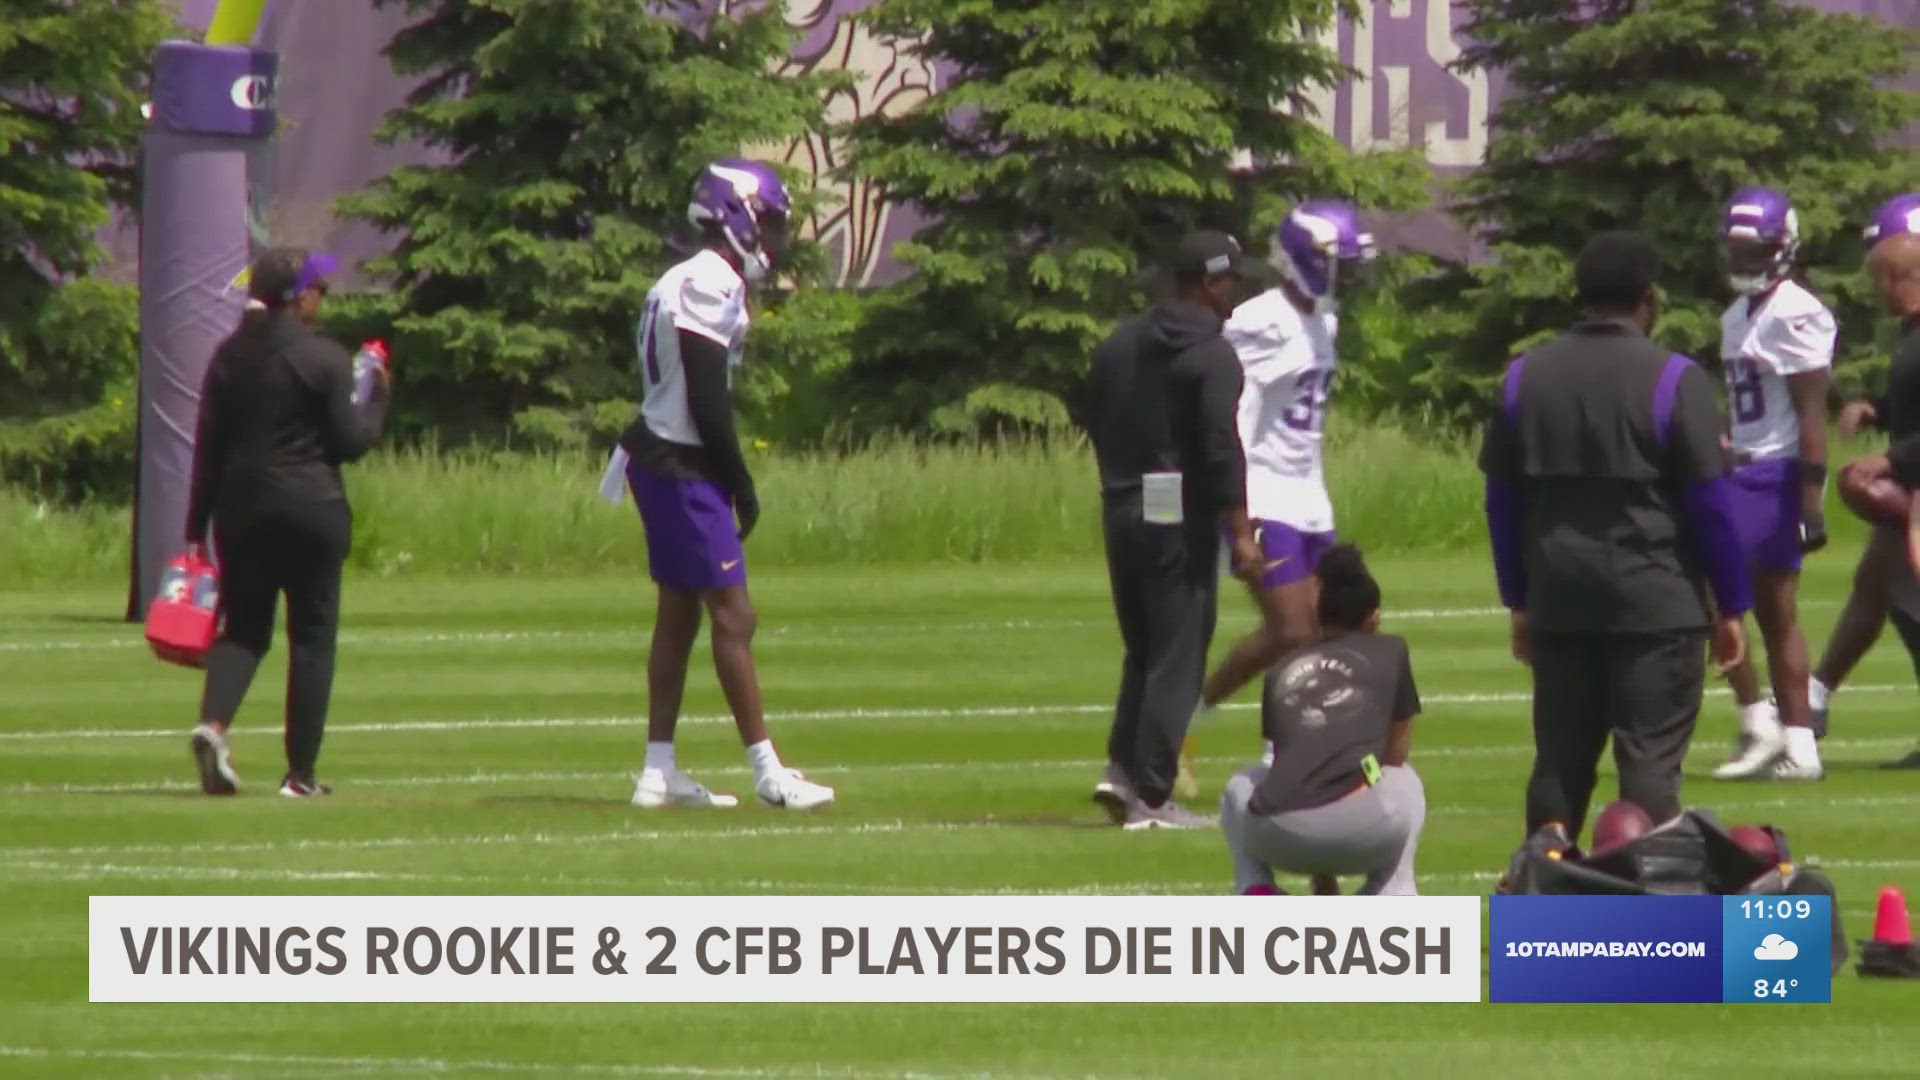 A recent draft pick for the Minnesota Vikings was tragically killed in a car crash on the East Coast, sources said on Saturday.